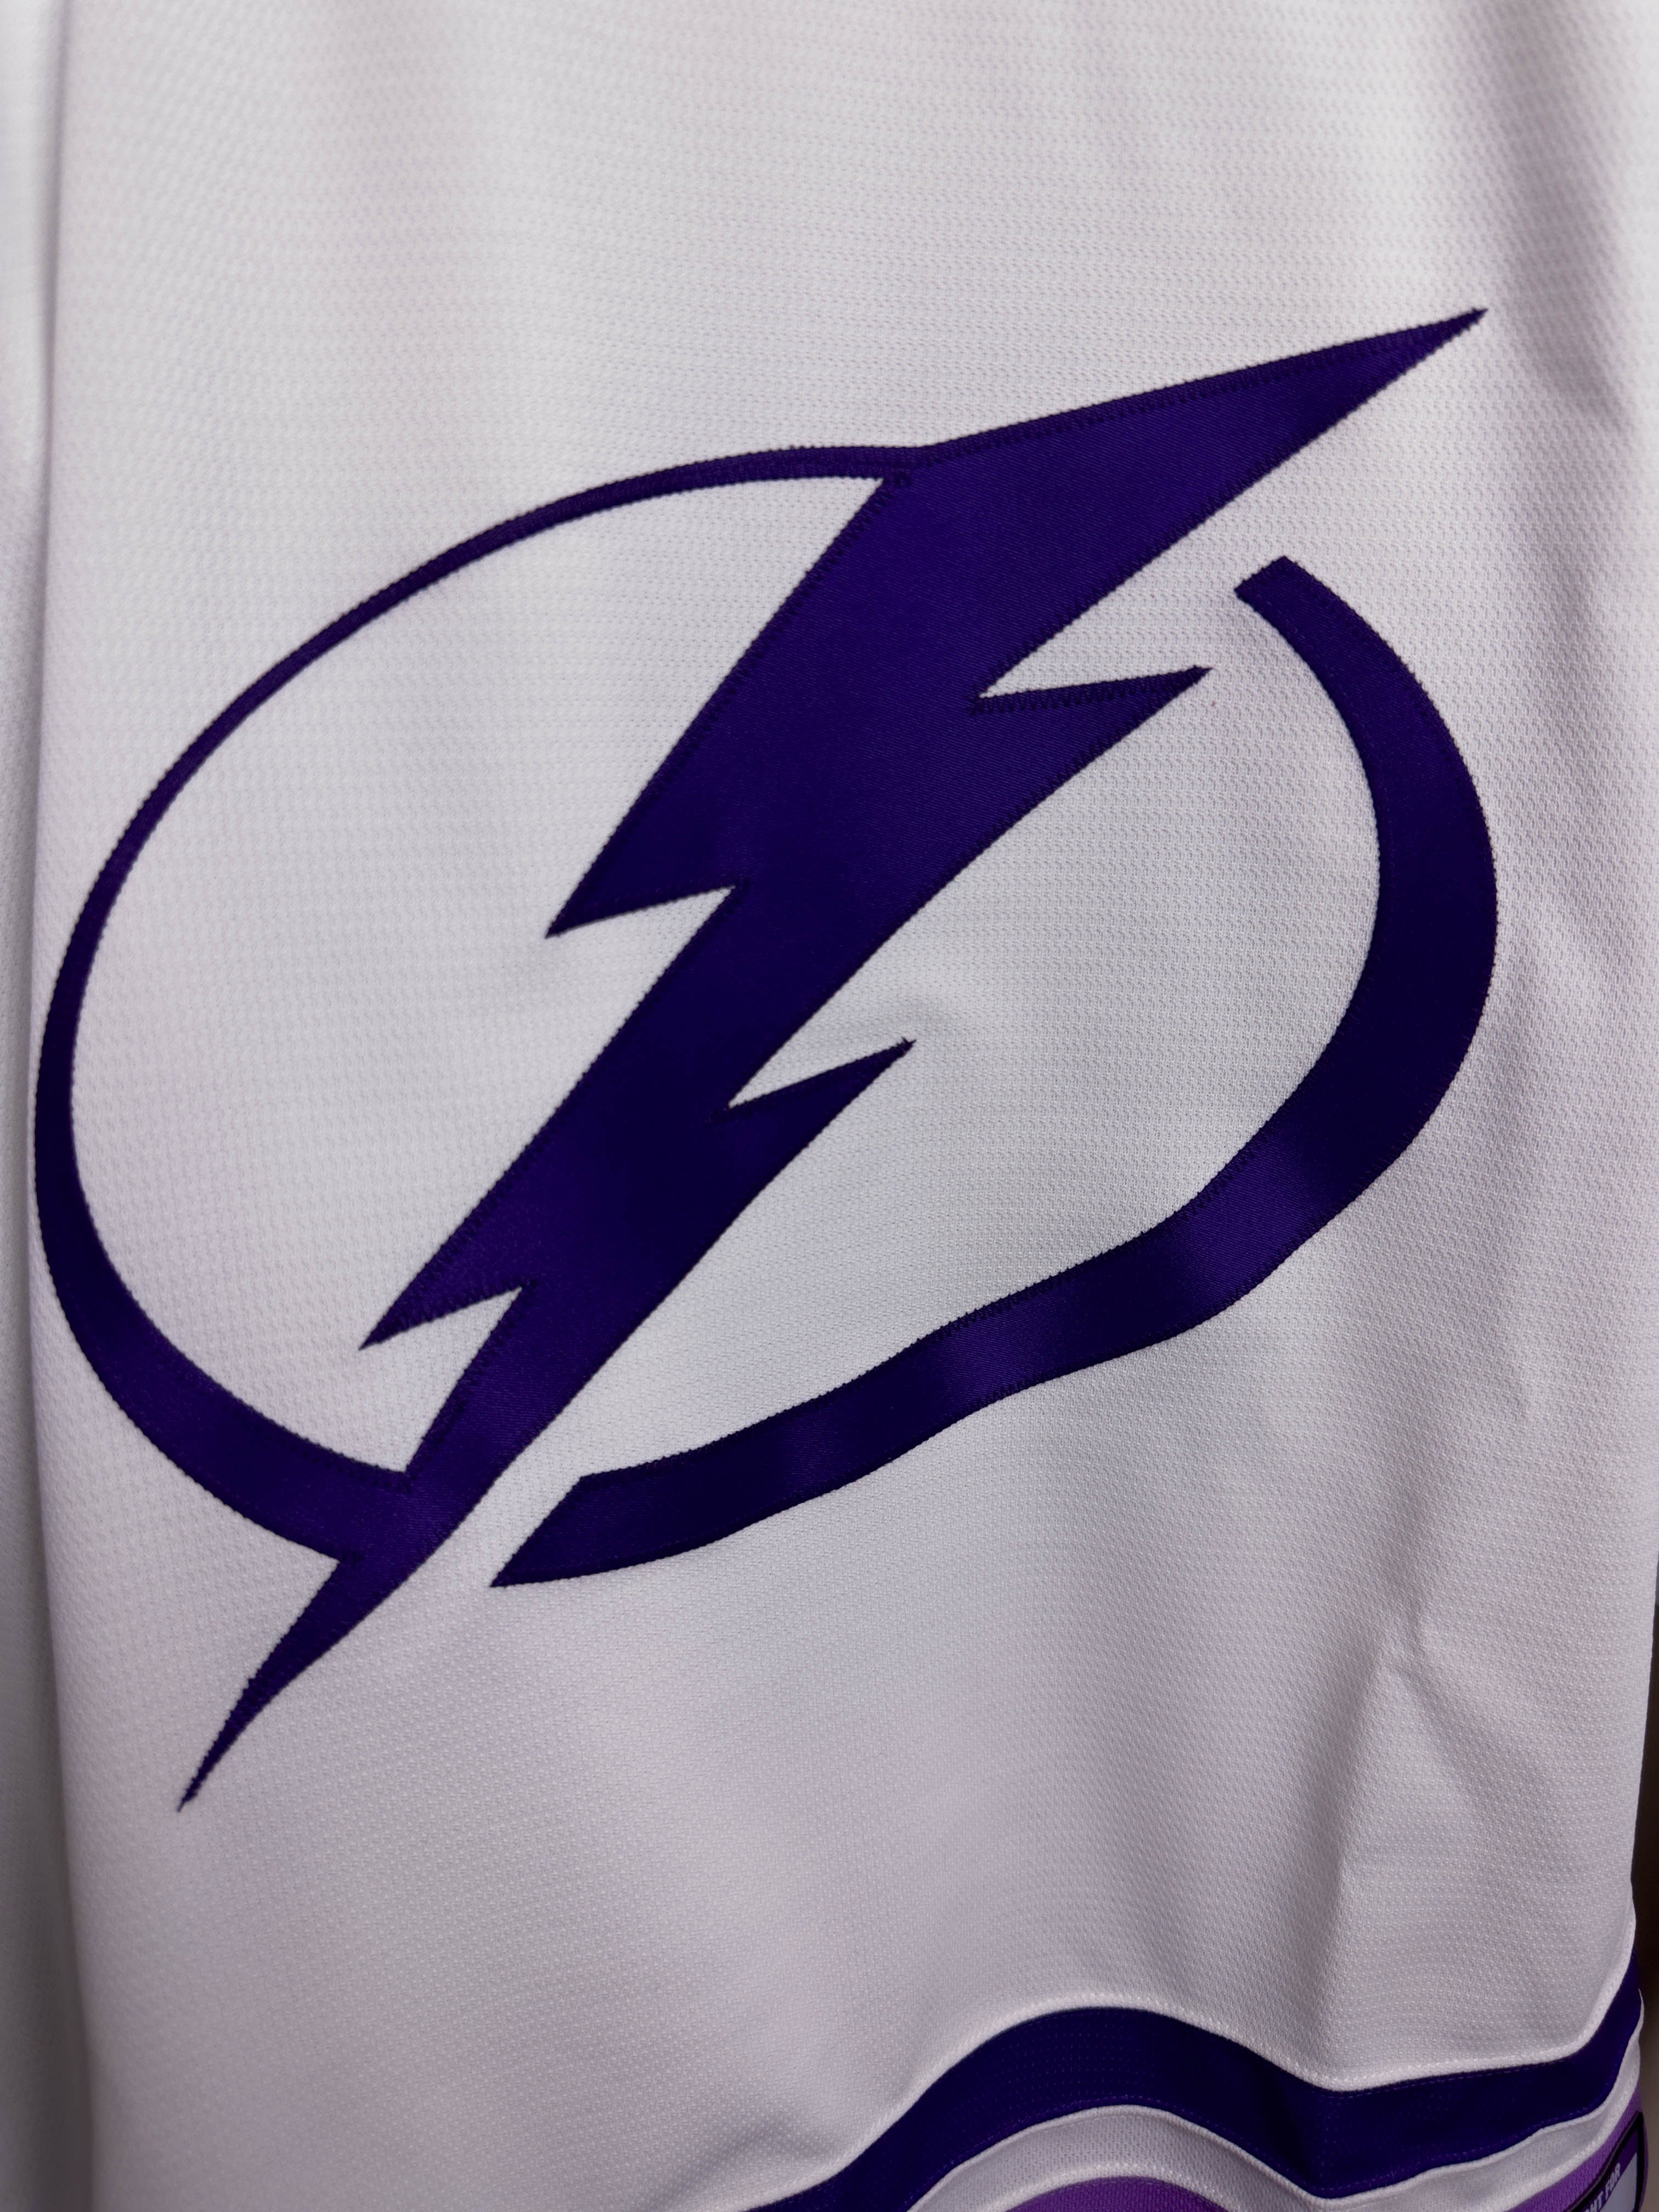 Tampa Bay Lightning NHL Adidas MiC Team Issued Hockey Fights Cancer Je –  Wave Time Thrift